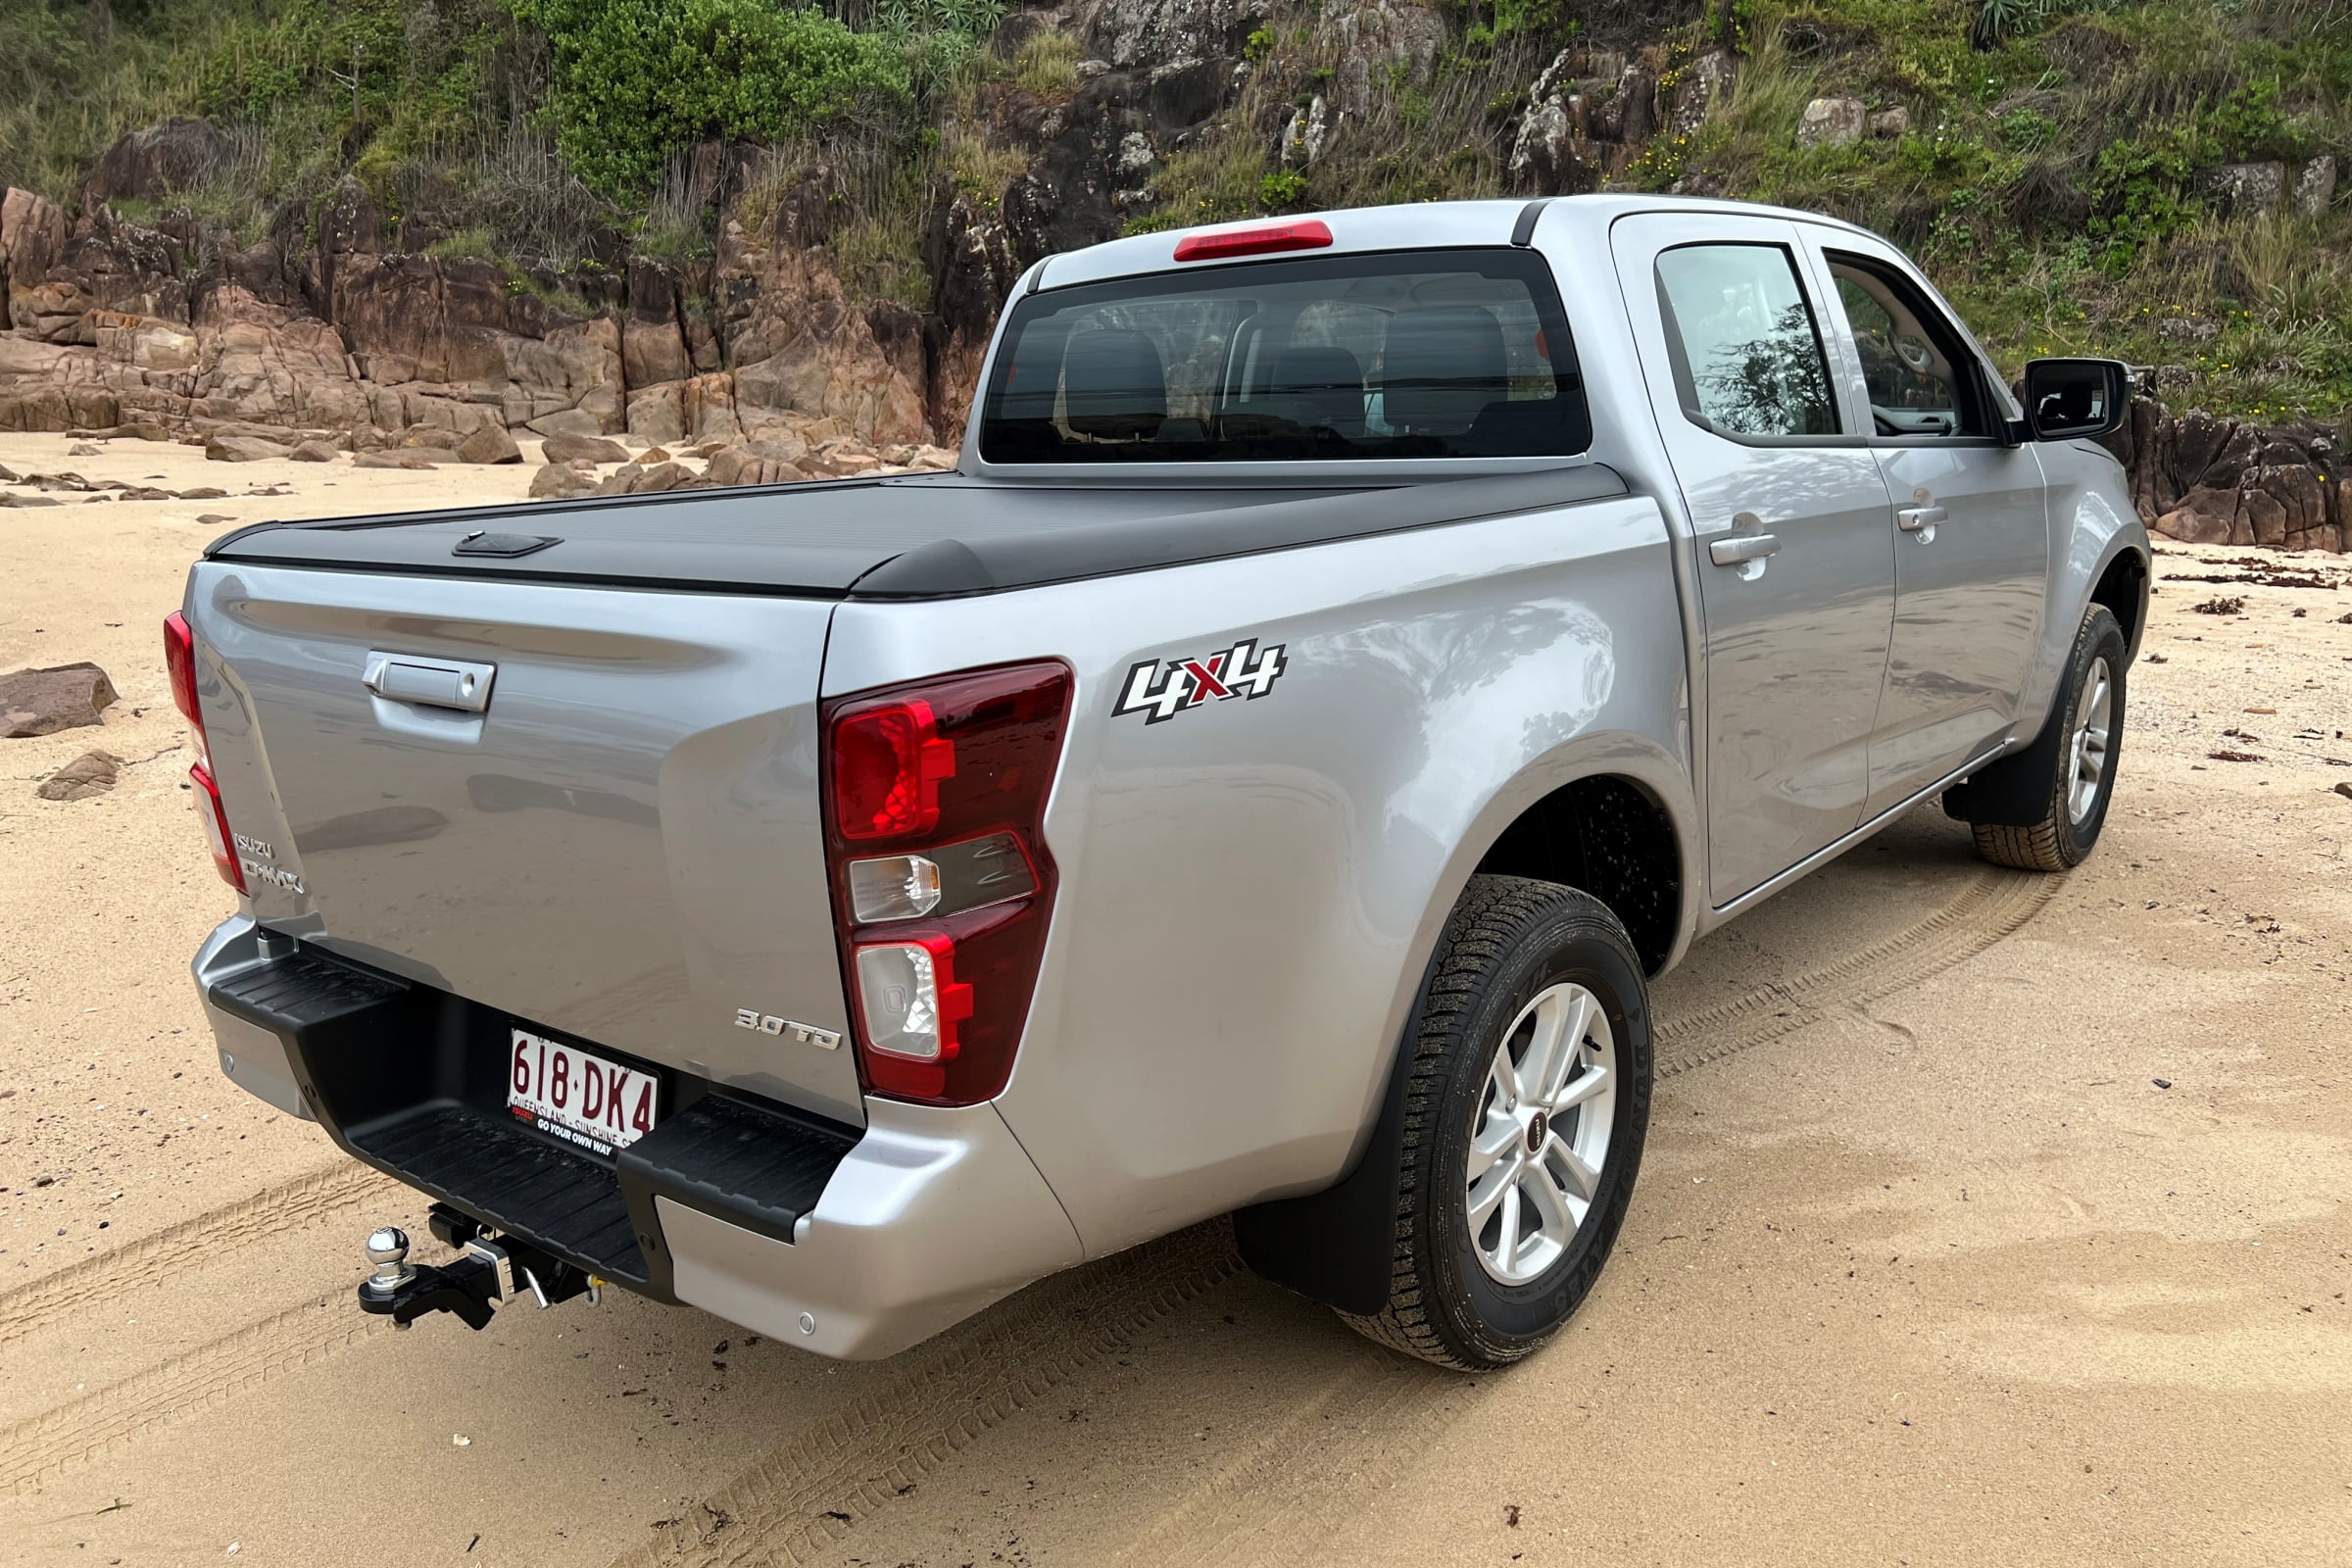 Isuzu D-Max is the ideal 4WD Ute